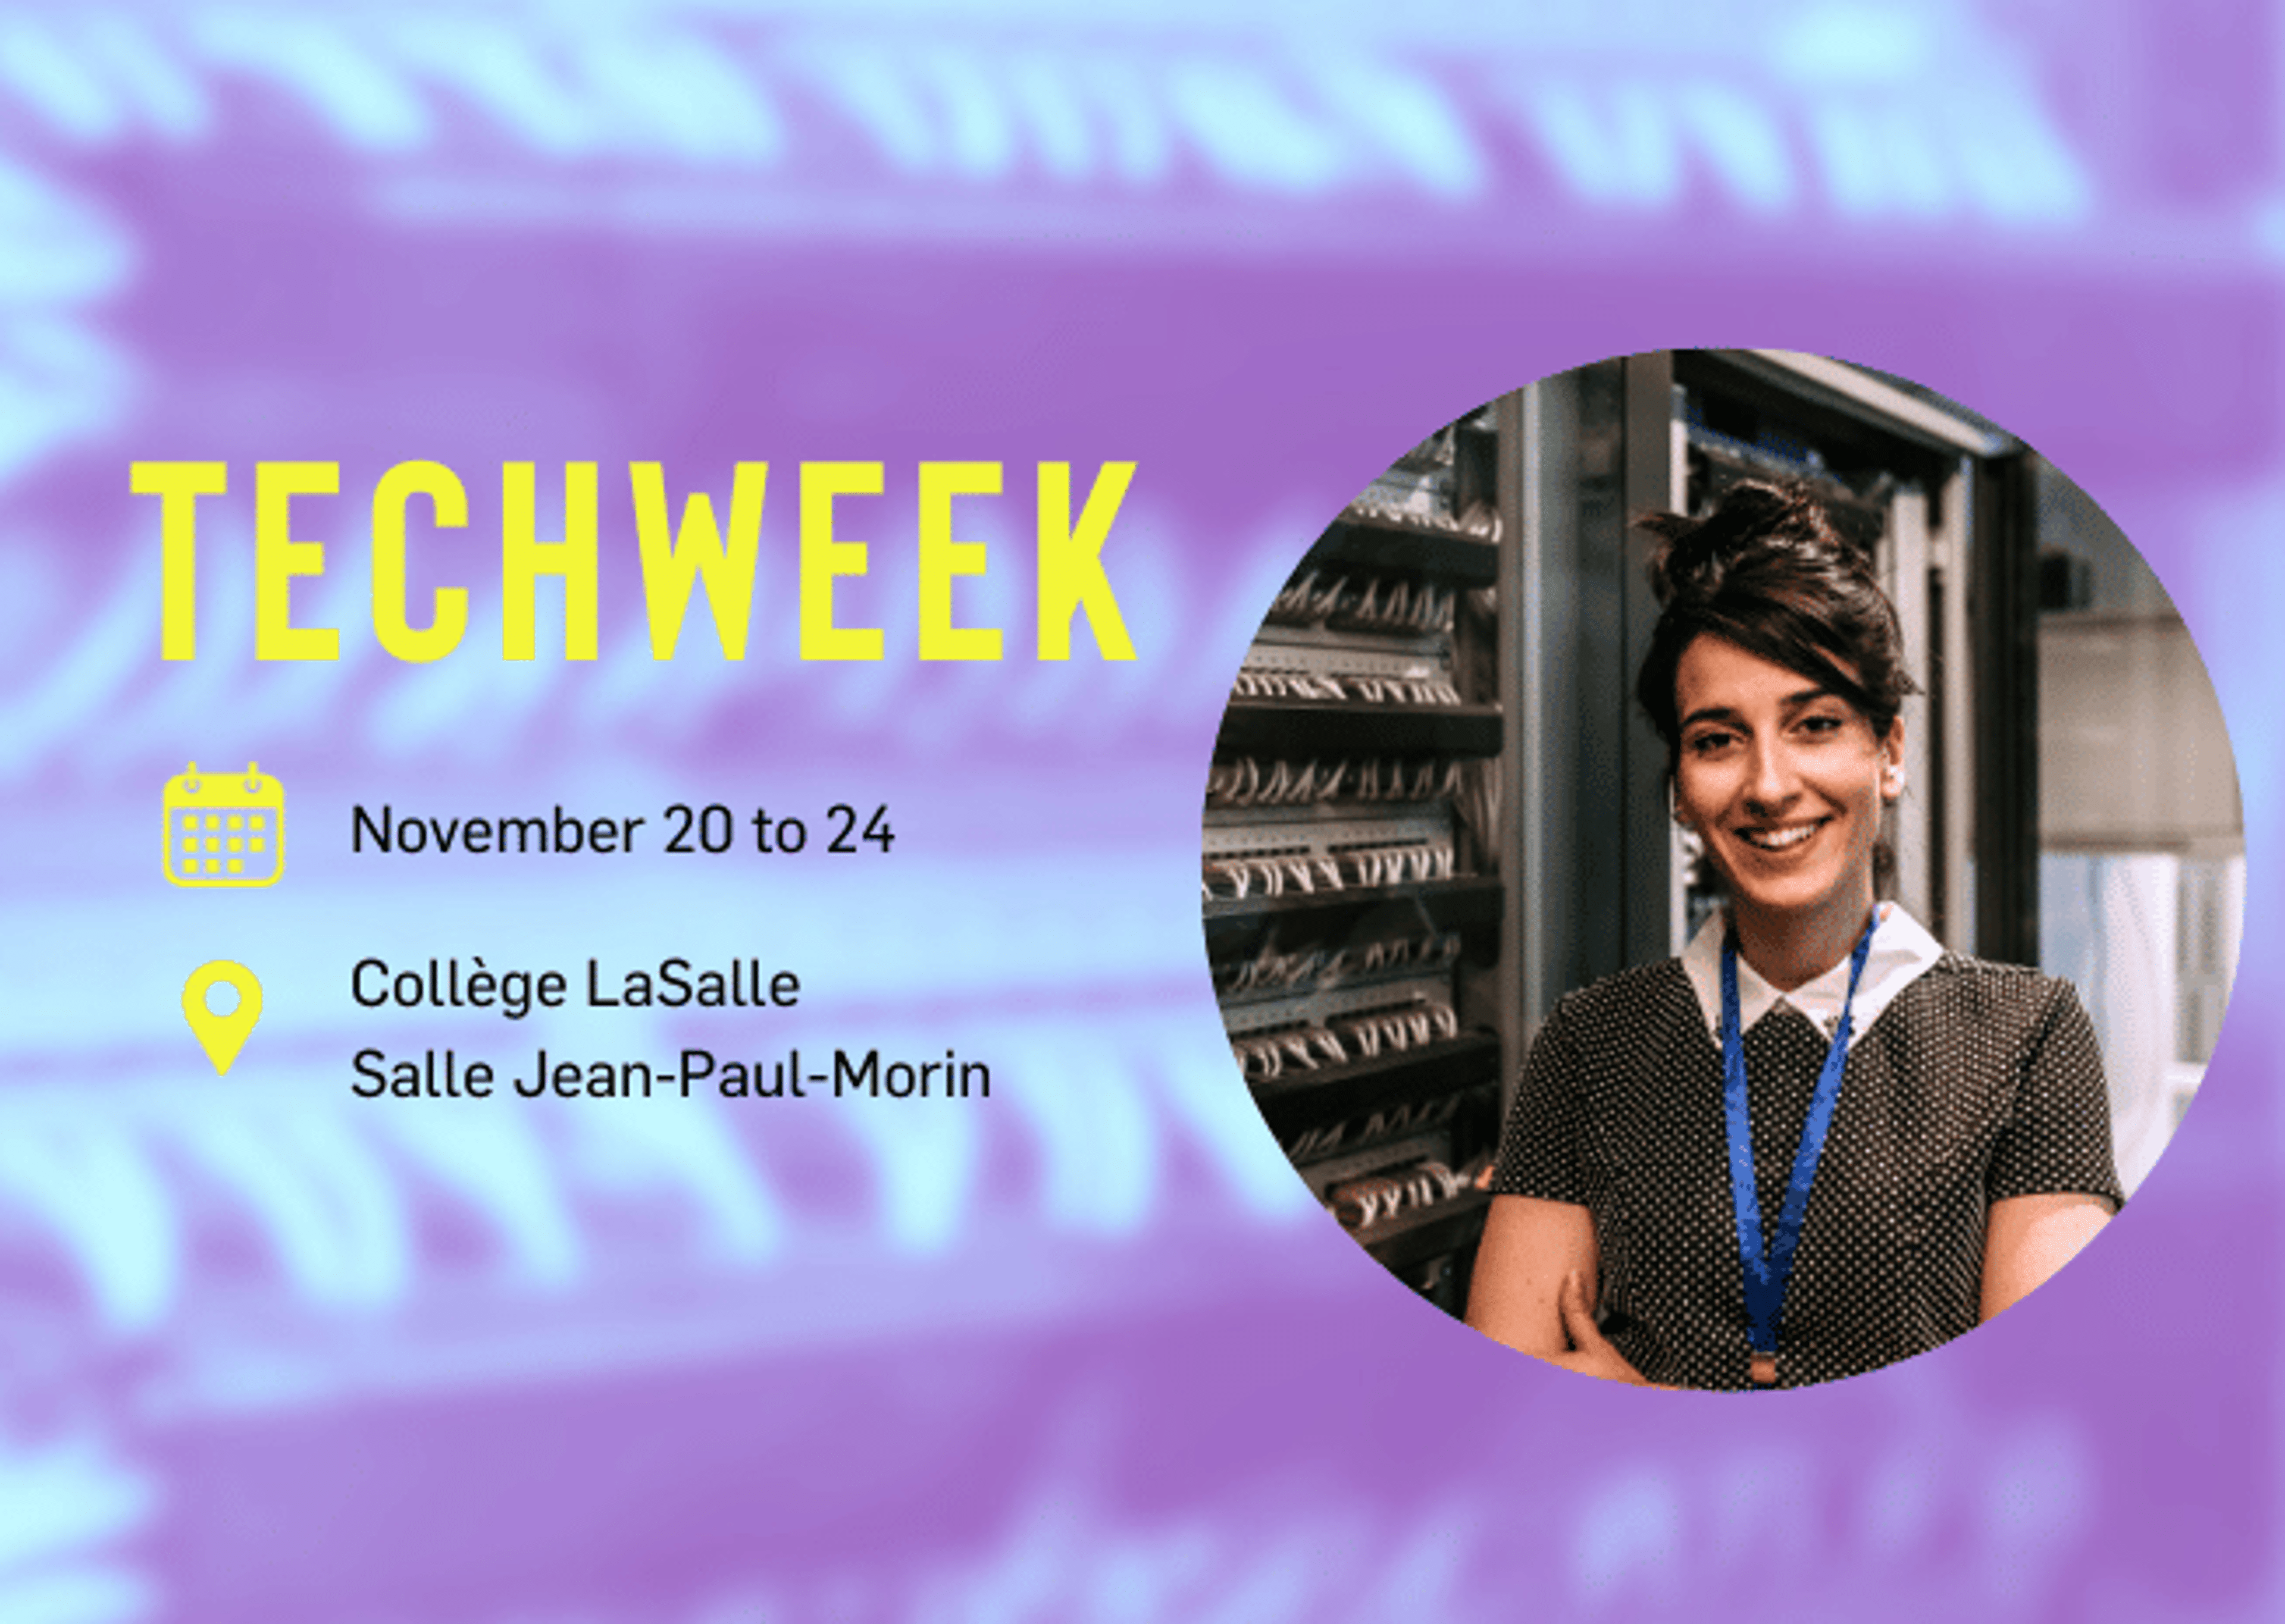 A professional woman at Tech Week, Nov 20-24 at Collège LaSalle, Salle Jean-Paul-Morin.